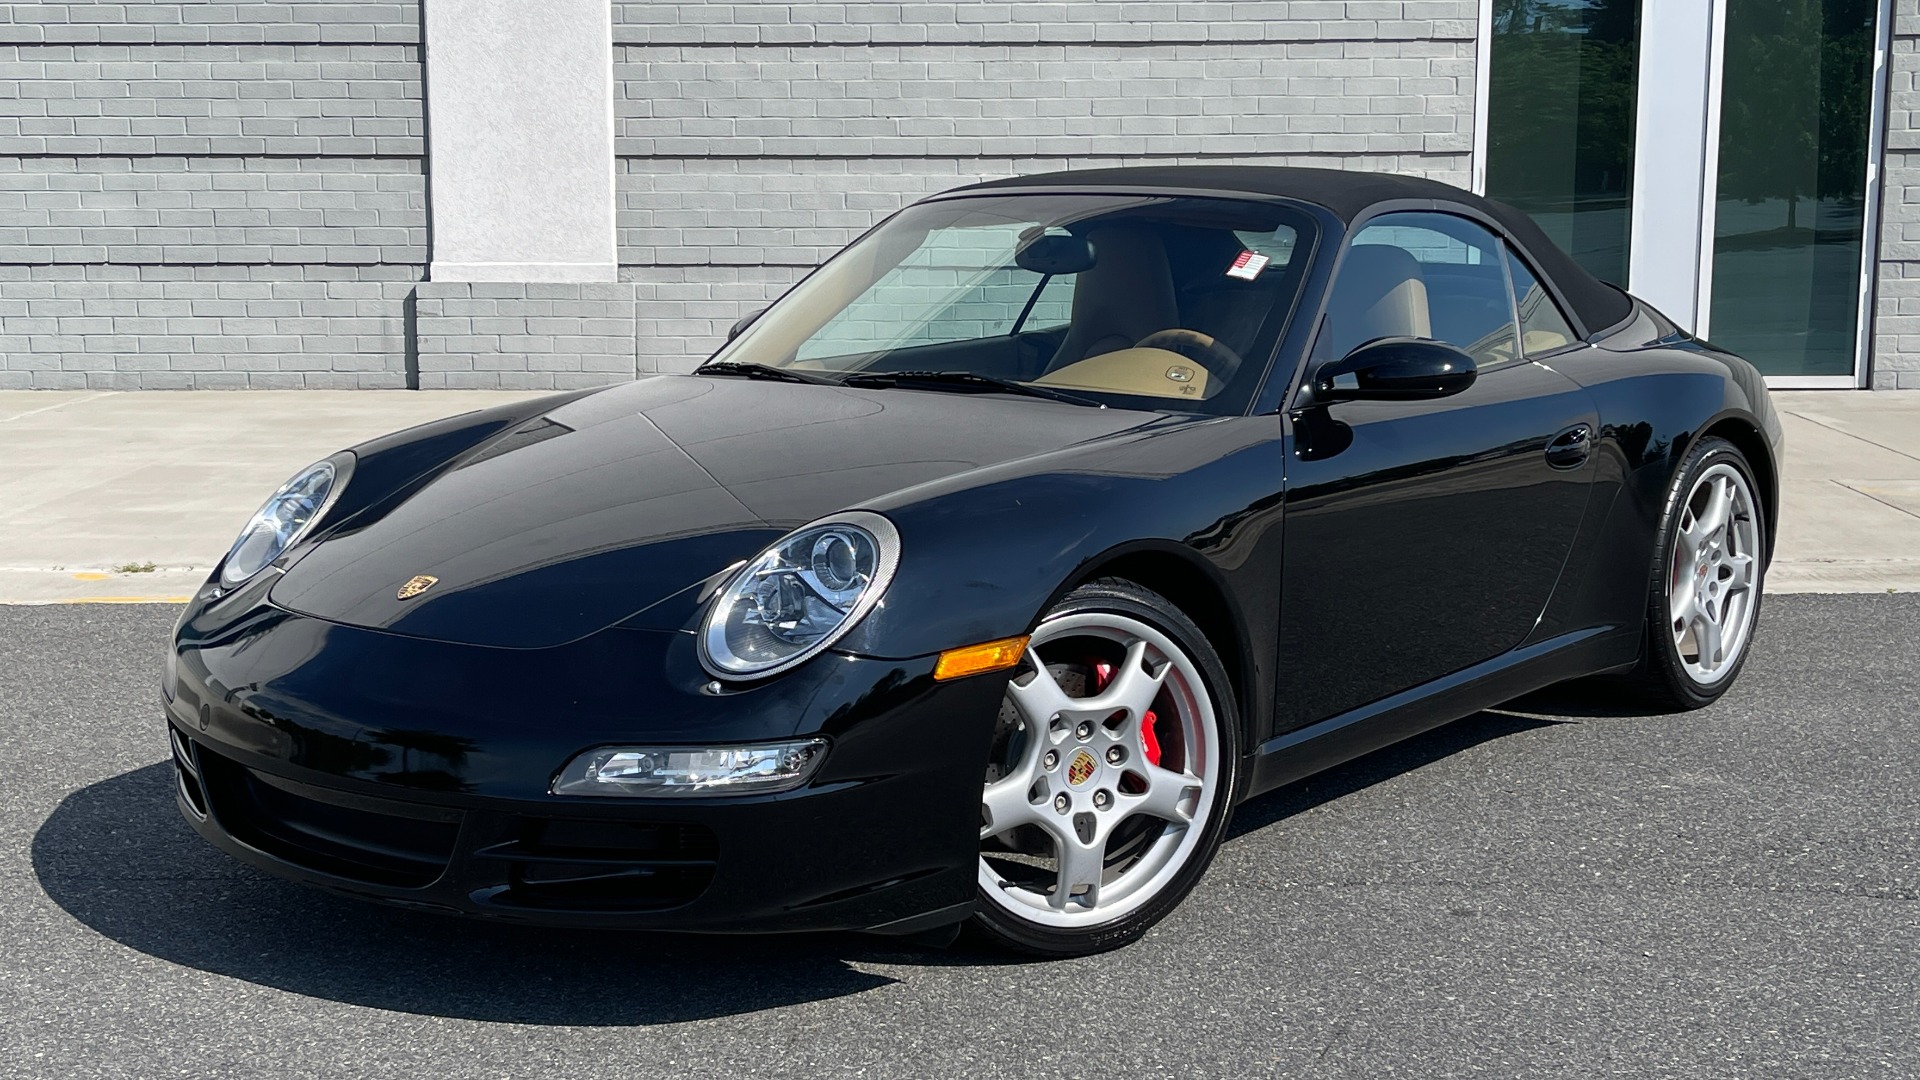 Used 2006 Porsche 911 CARRERA S CABRIOLET / BOSE / CD CHANGER / PWR SEAT PKG / HTD STS for sale $60,999 at Formula Imports in Charlotte NC 28227 20